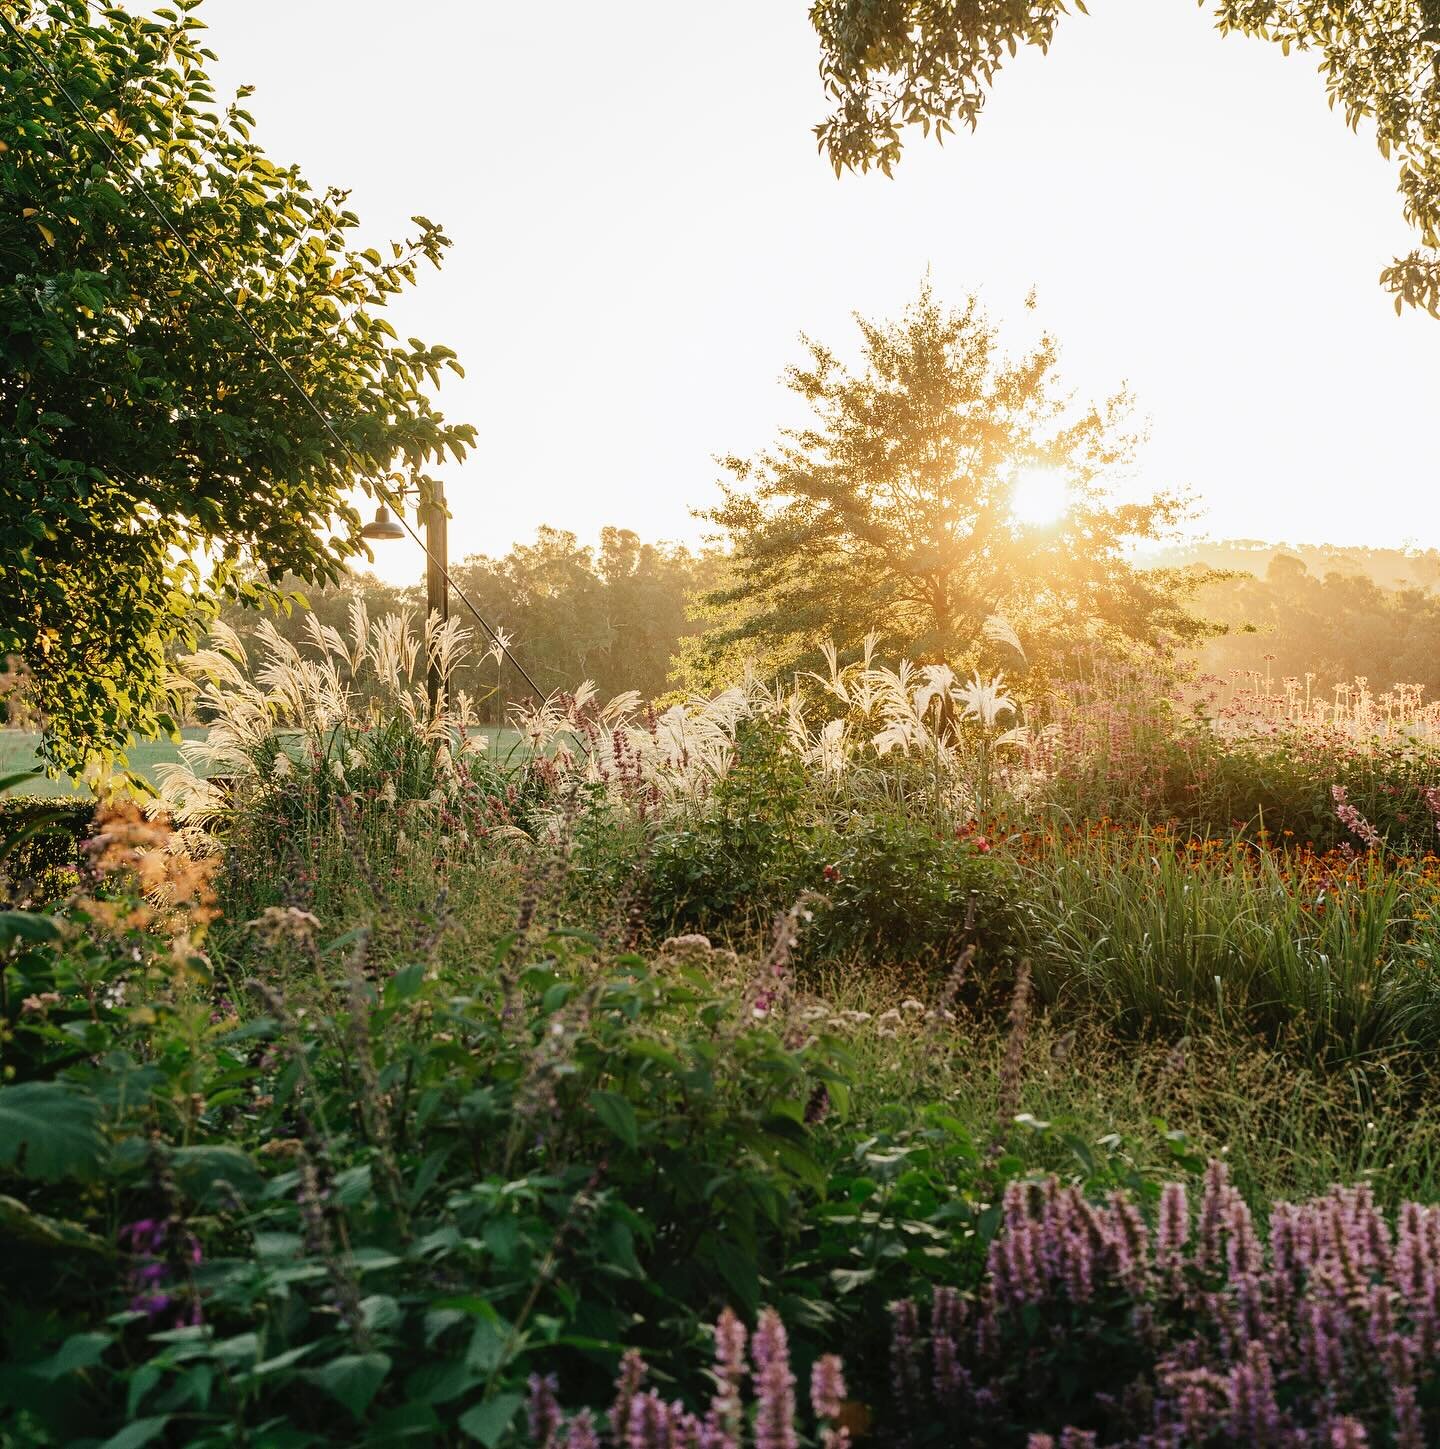 Afternoon light in our summer garden. Thanks so much @thesocialherd_au  for capturing such a magical moment. It&rsquo;s our Garden Open Day this Saturday at 9am. The garden is lookig more Autumnal by the day. You can be sure to see the Helianthus ang